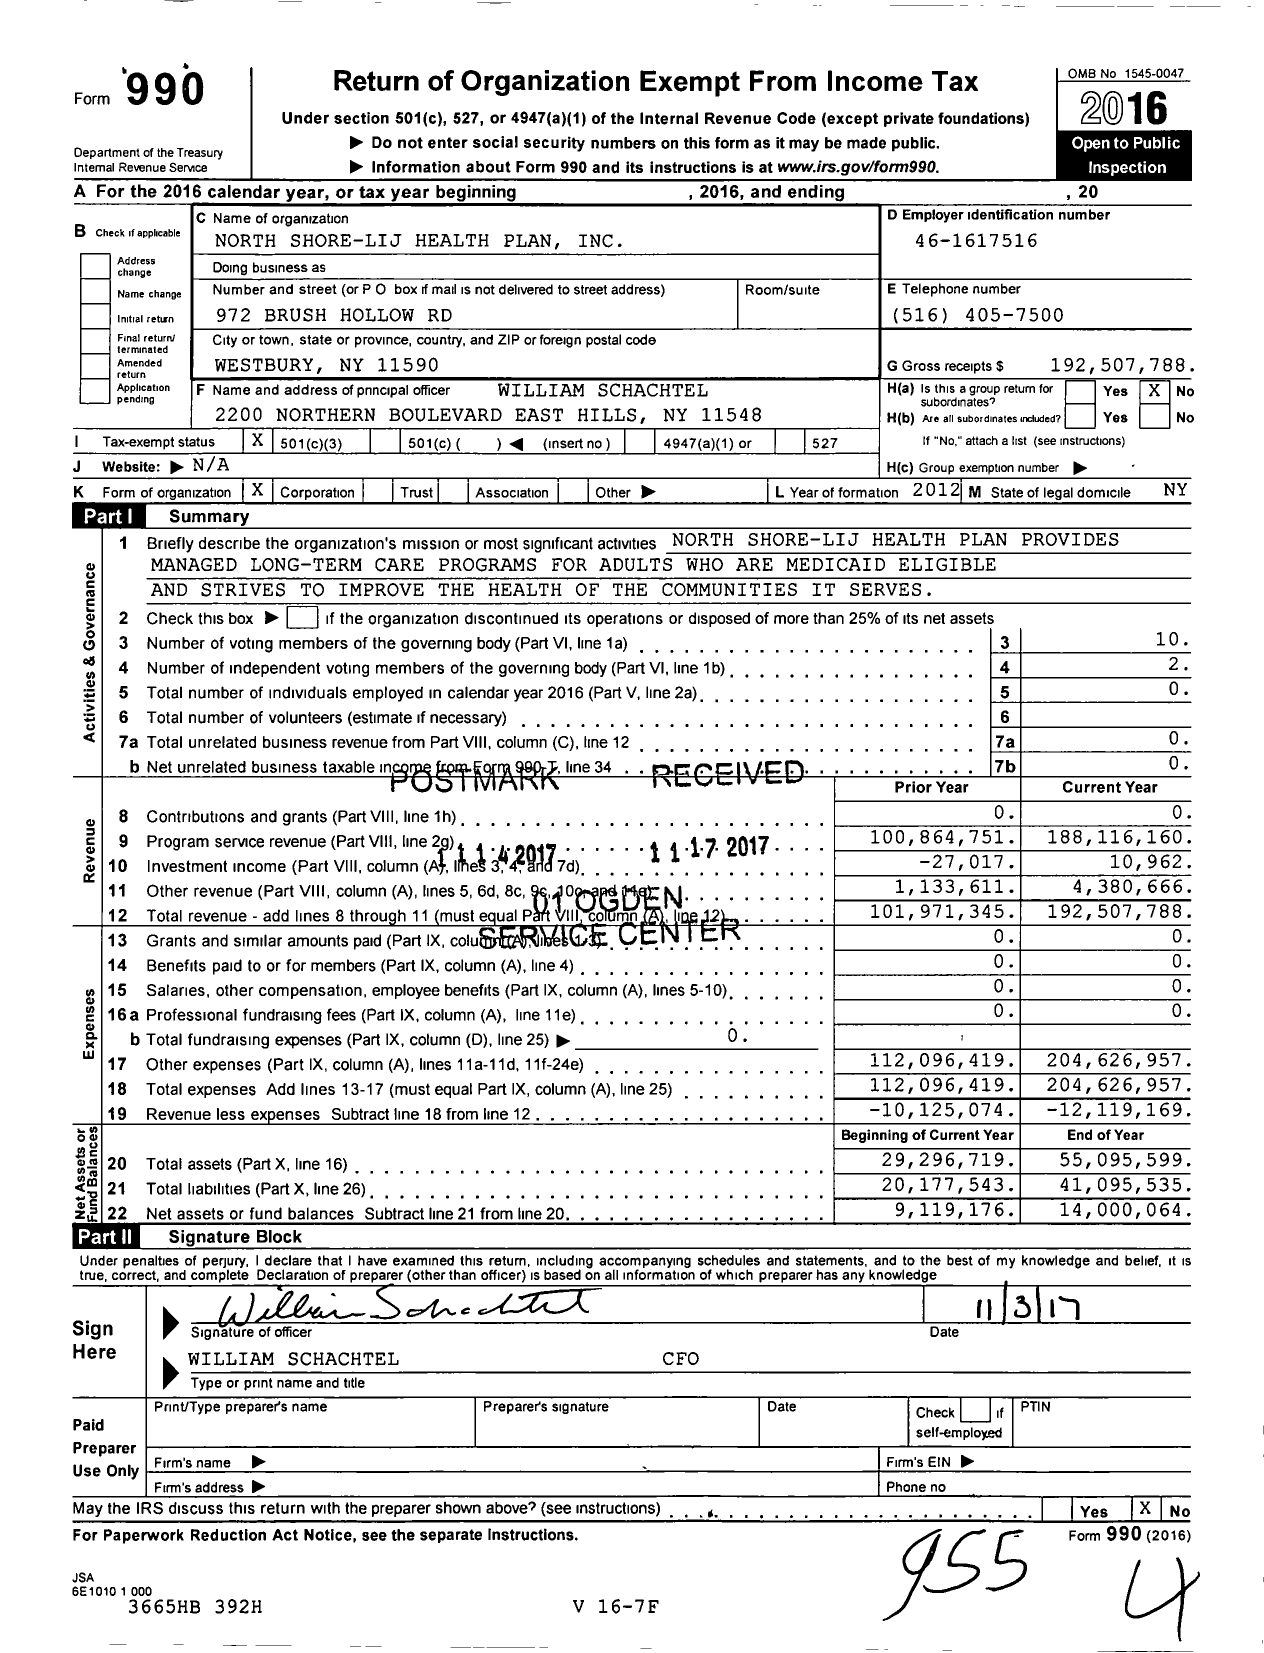 Image of first page of 2016 Form 990 for North Shore-Lij Health Plan